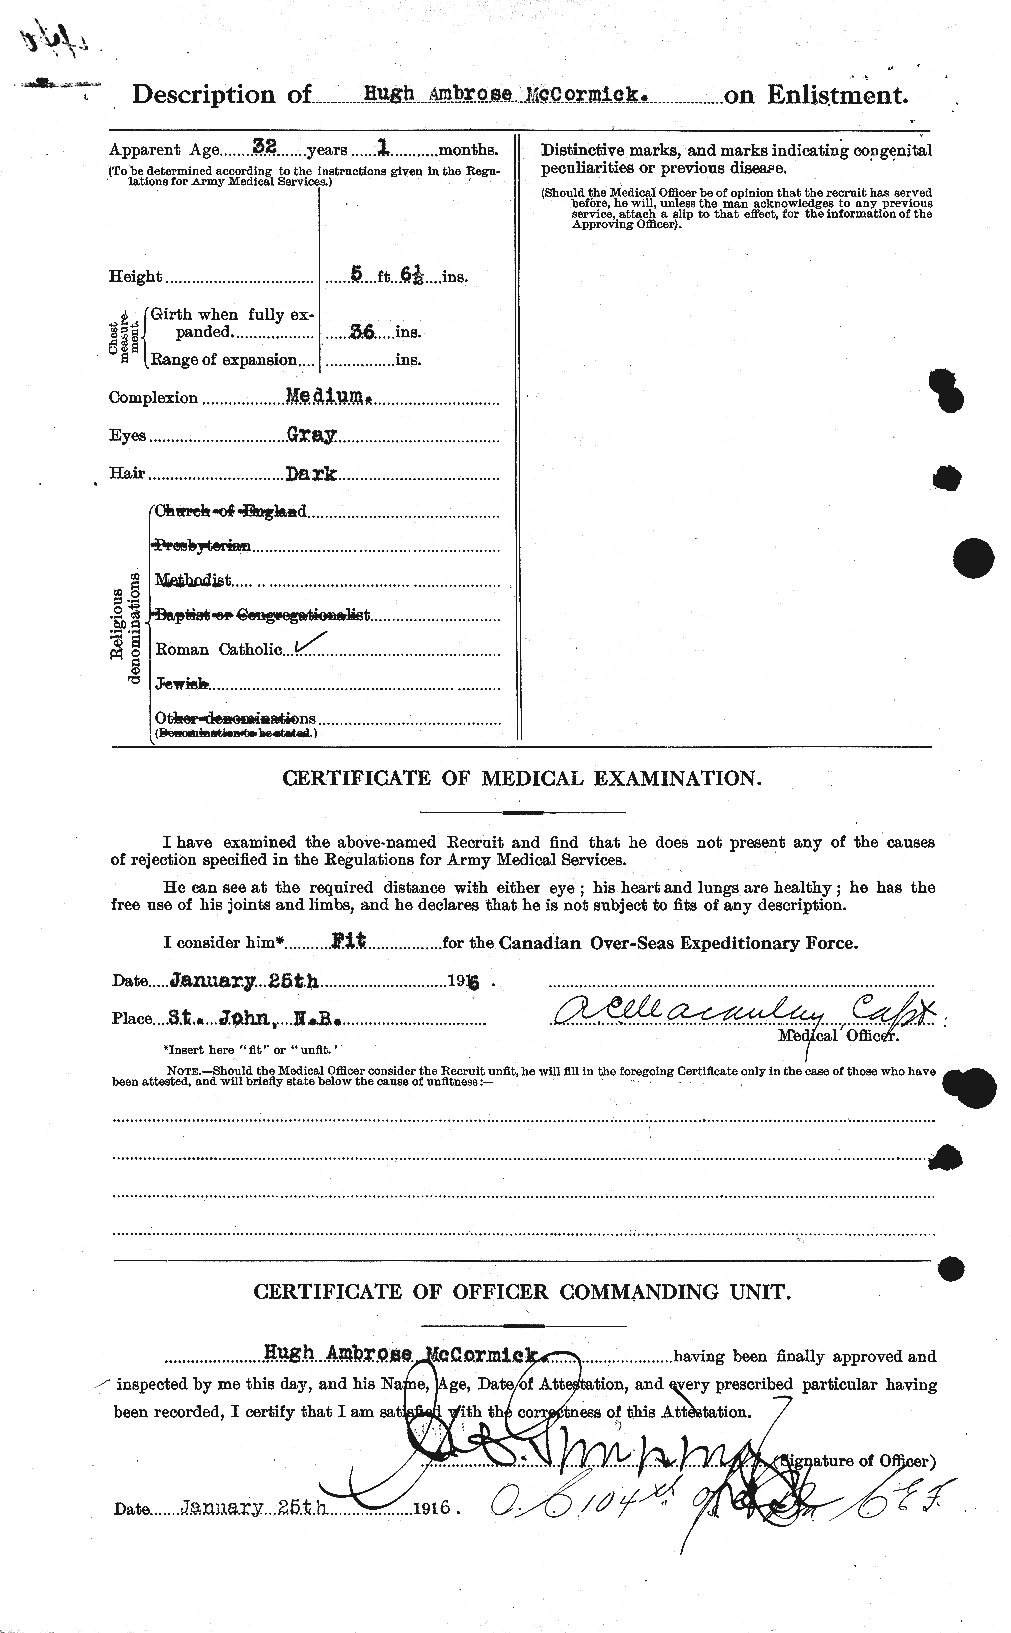 Personnel Records of the First World War - CEF 133735b